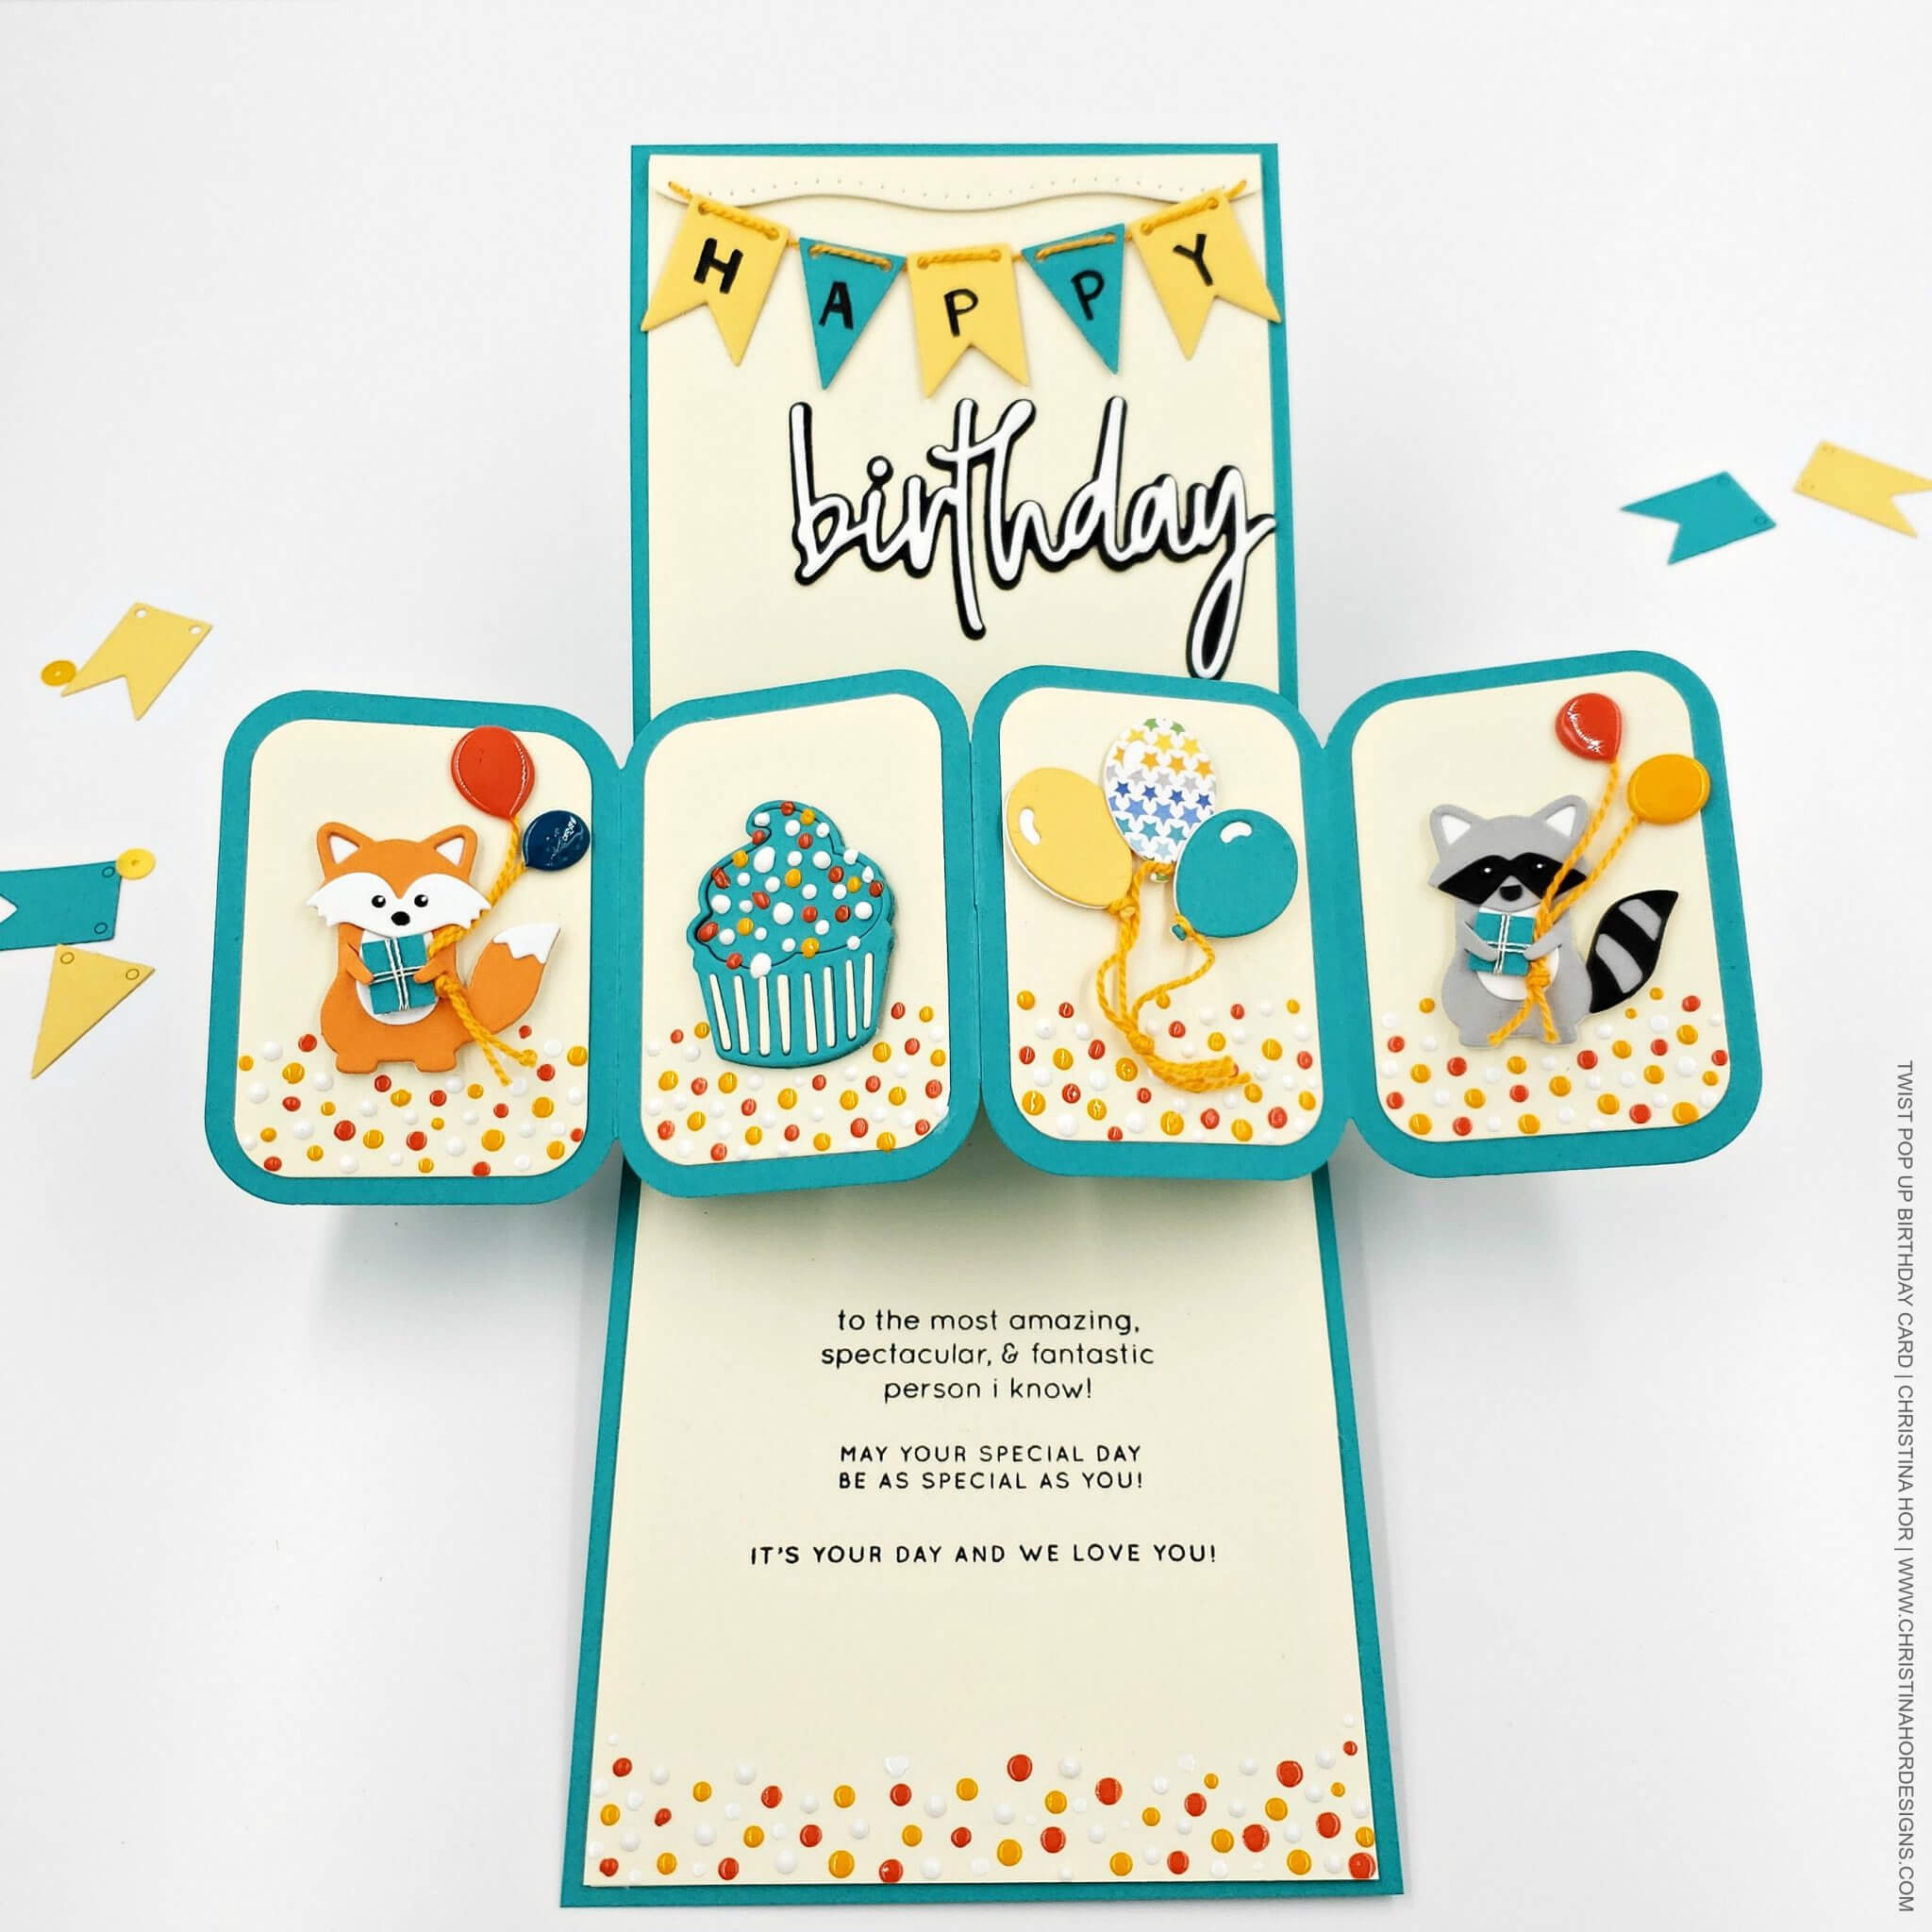 How To Make A Twist Pop Up Birthday Card | Christina Hor Designs For Twisting Hearts Pop Up Card Template